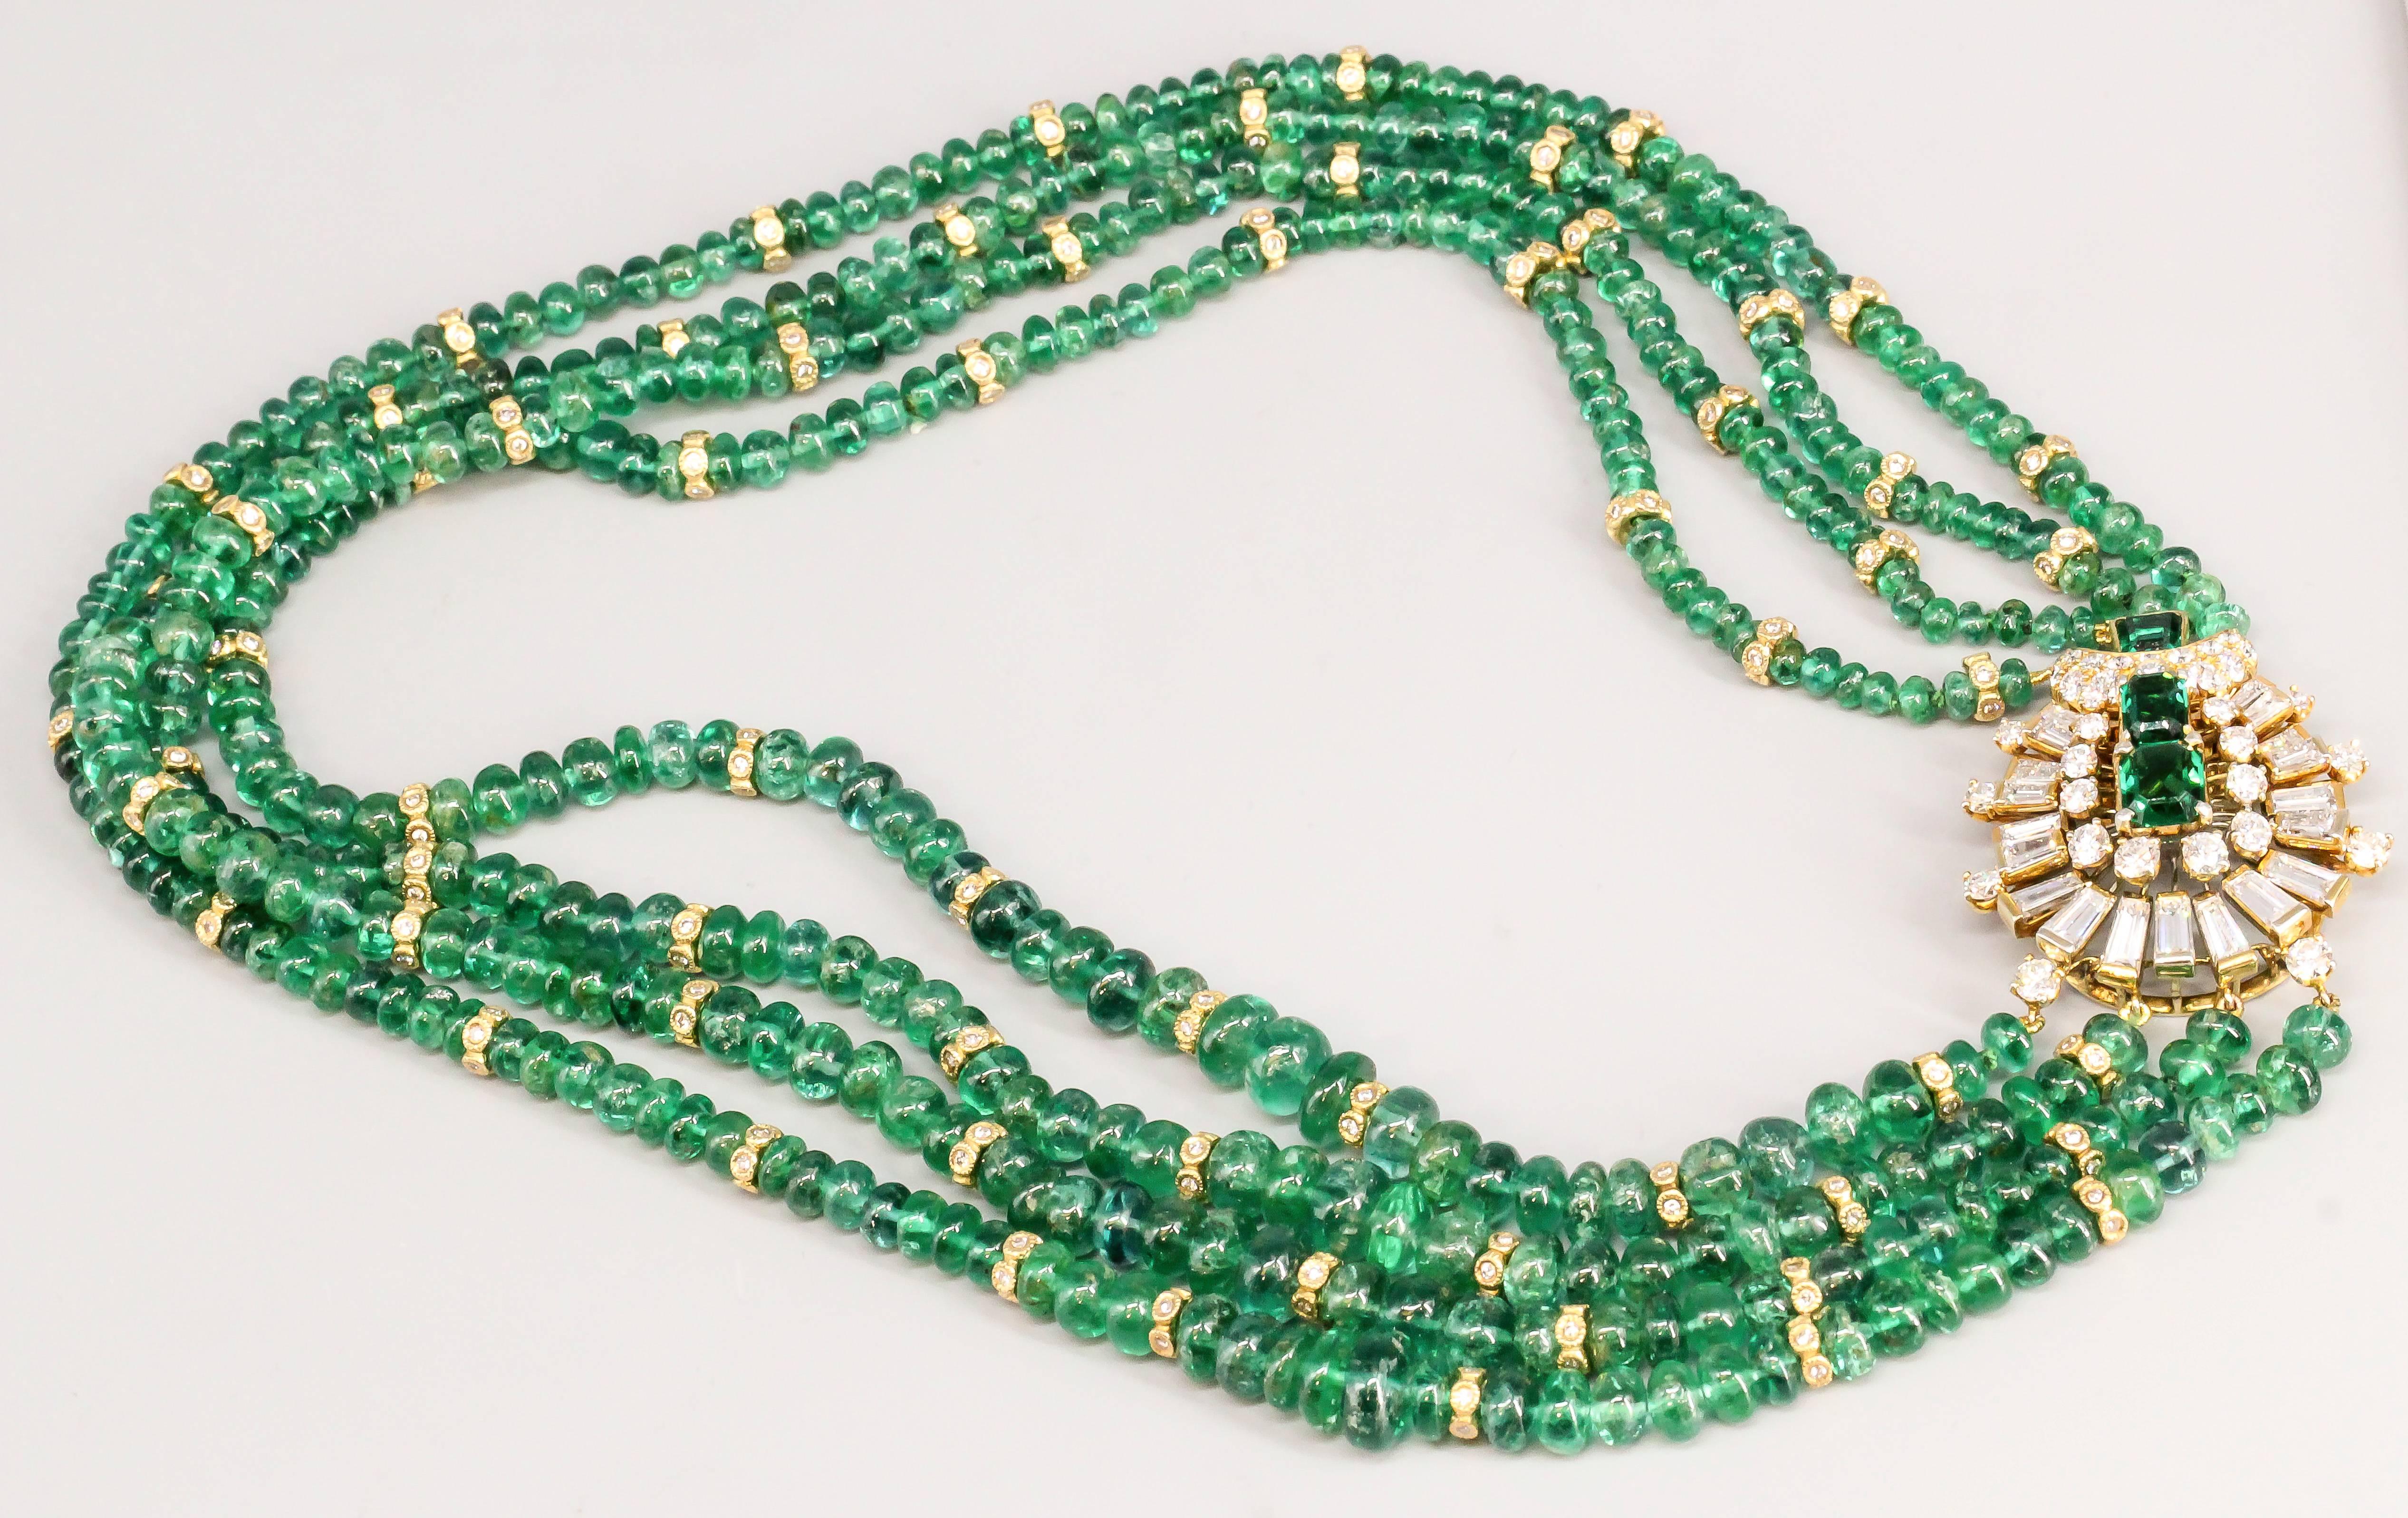 Impressive emerald, diamond and 18K yellow gold beaded necklace. It features high grade round and tapered baguette cut diamonds, approx. 7.0-8.0 cts total weight. Emeralds are deep green and prominently featured with large stones. The rest of the